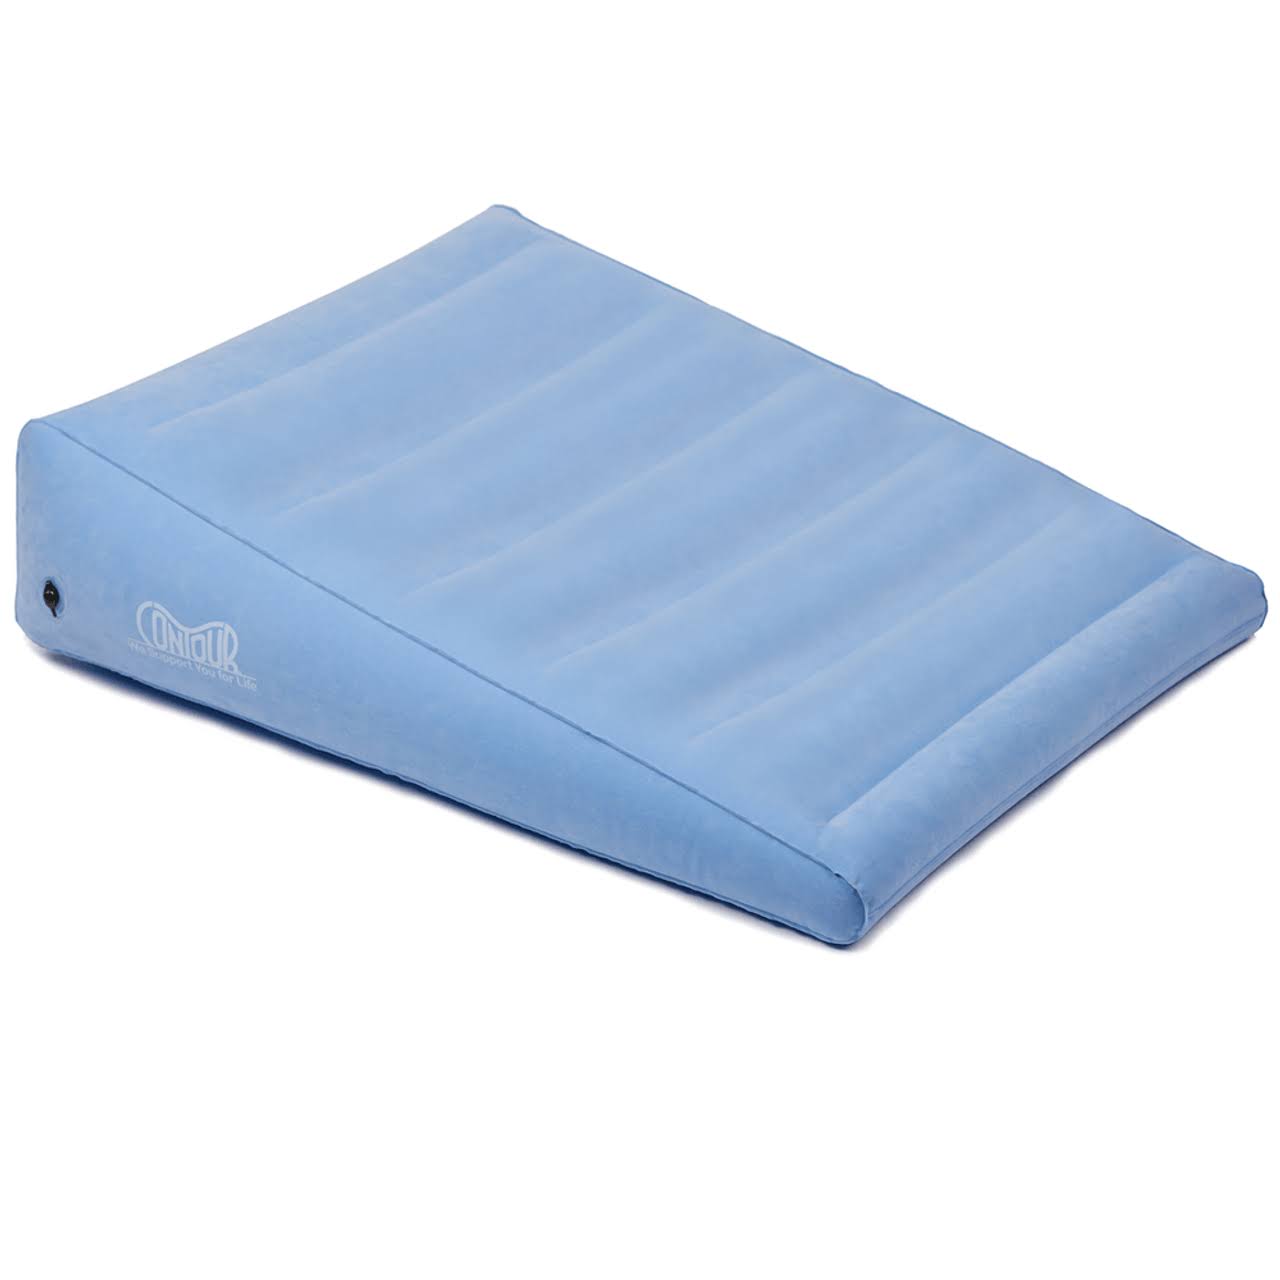 Contour Inflatable Back Support Relief Bed Wedge Cushion - Extended Le